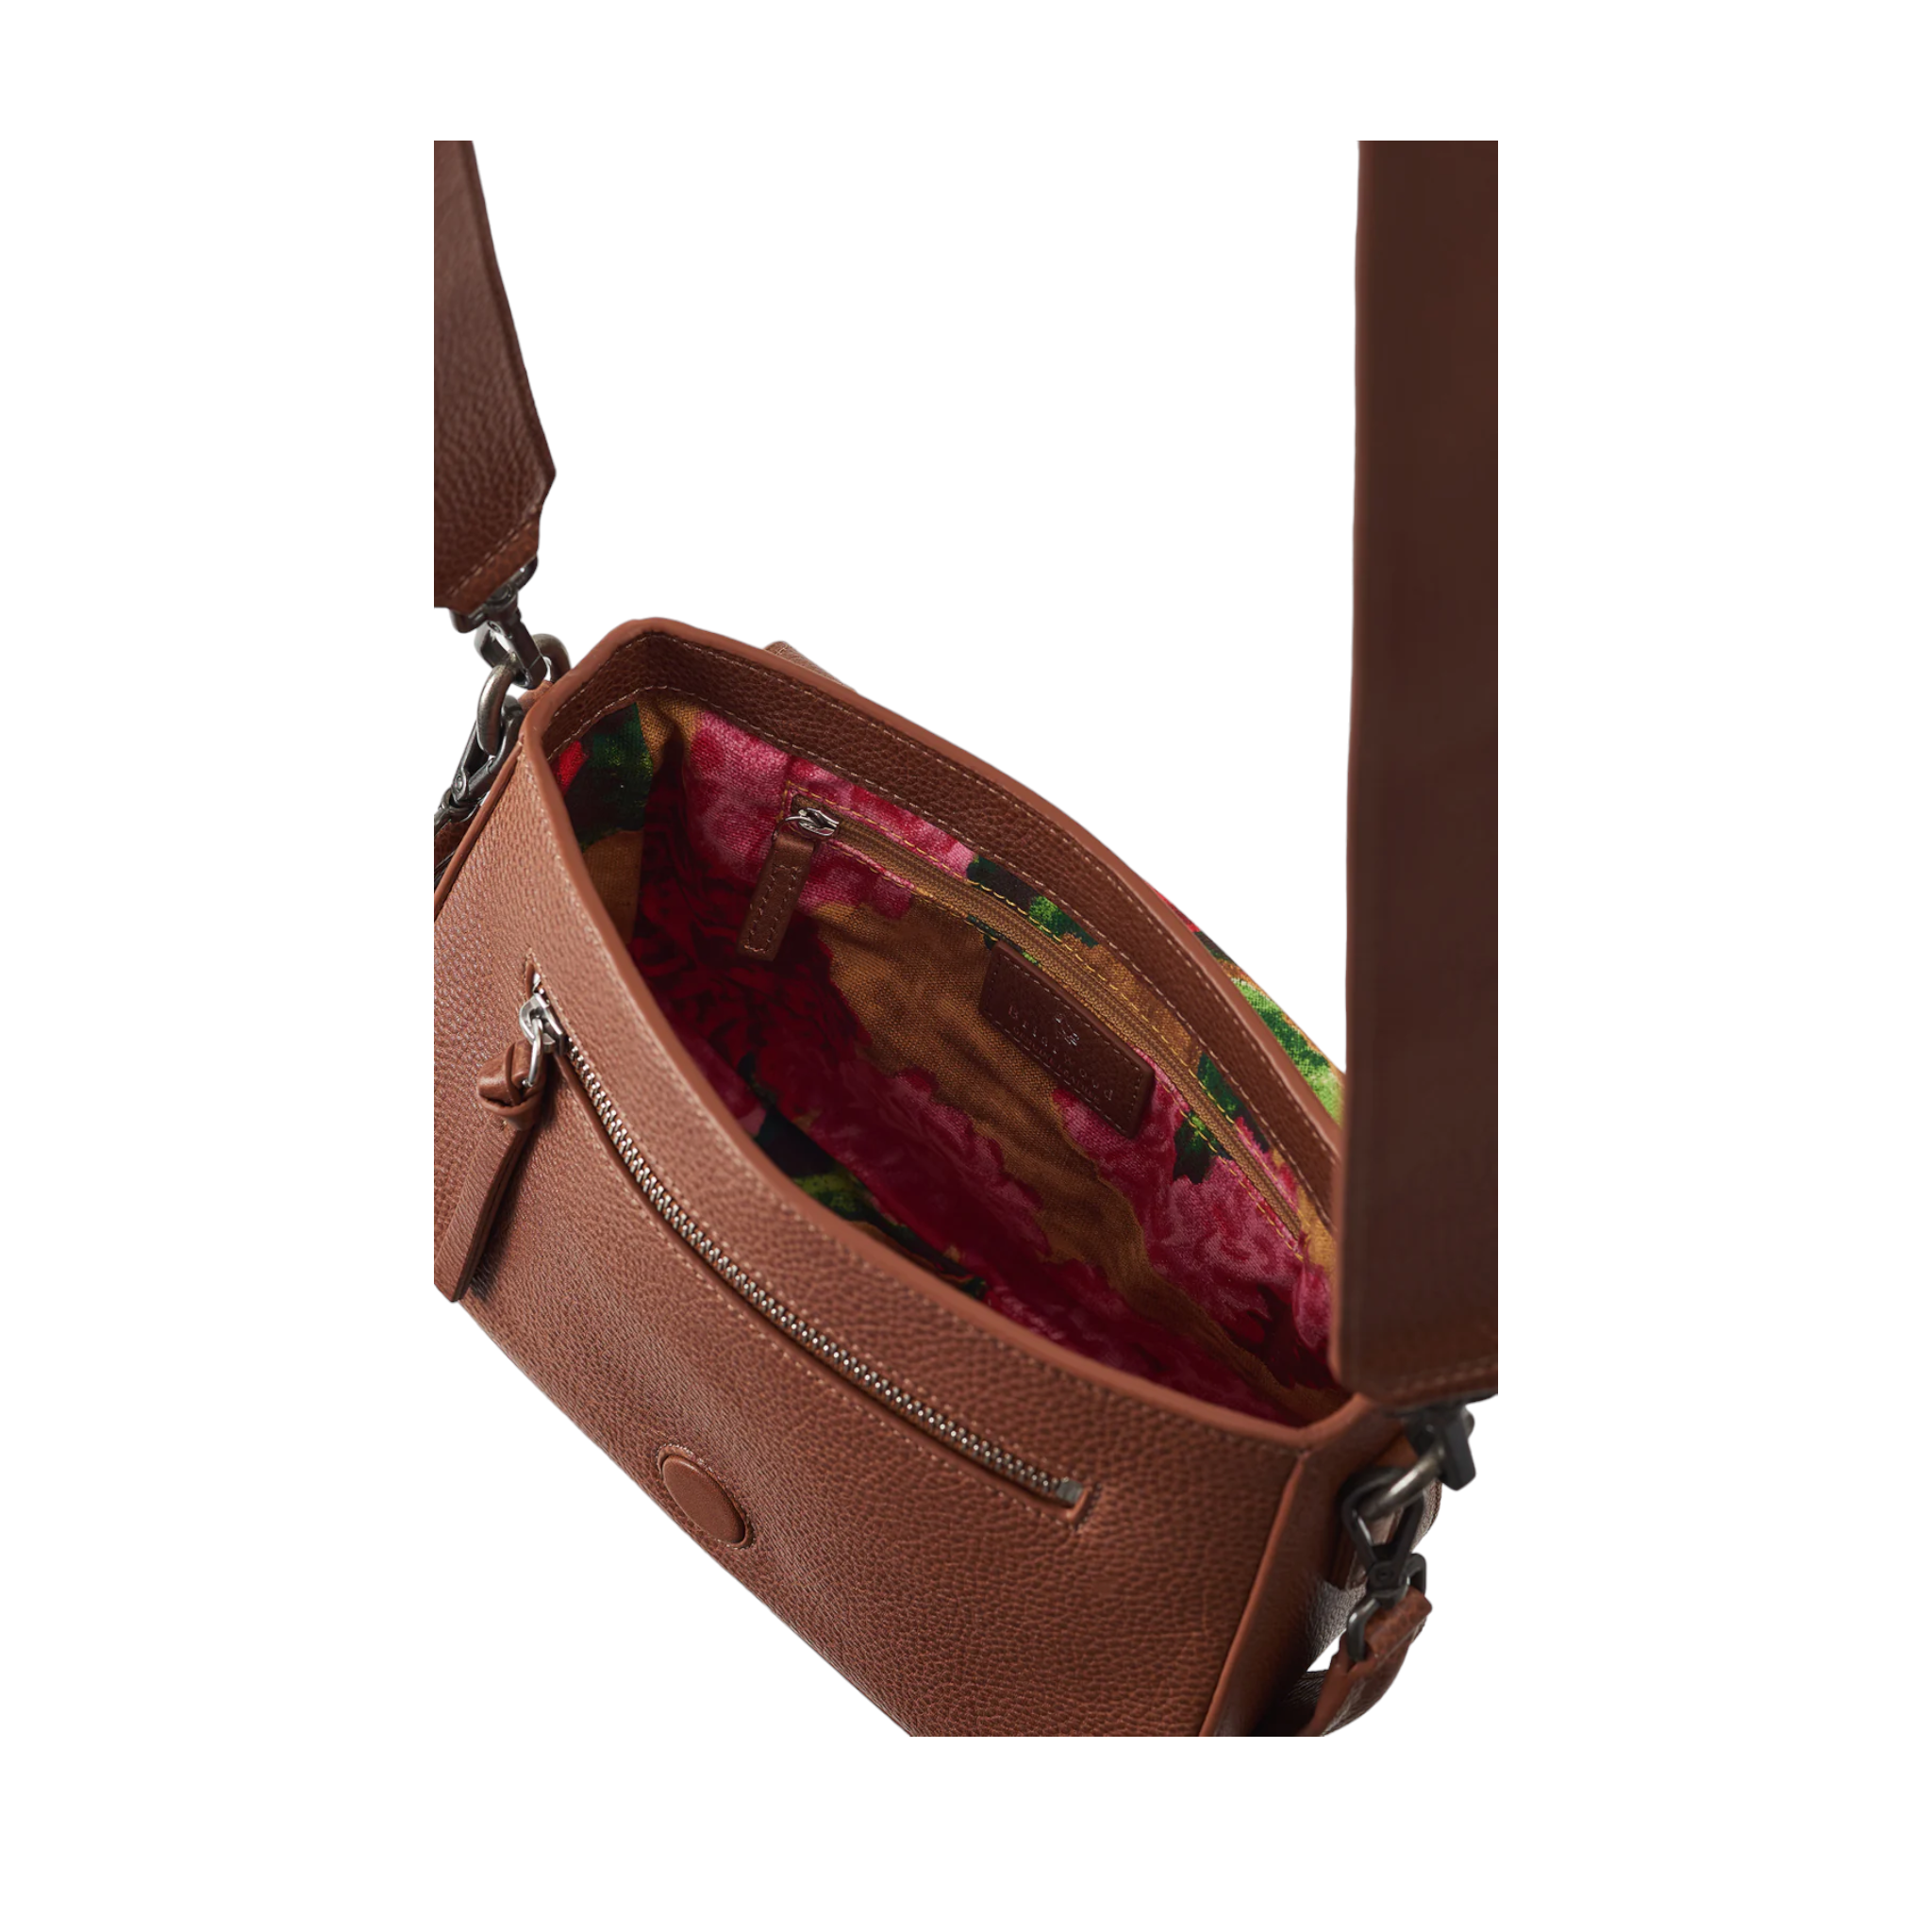 view of inside, canvas lined with beautiful hydrangea pattern.of Quintana Briarwood Chestnut coloured handbag. Crafted with fine leather, with a shoulder strap and a short strap.